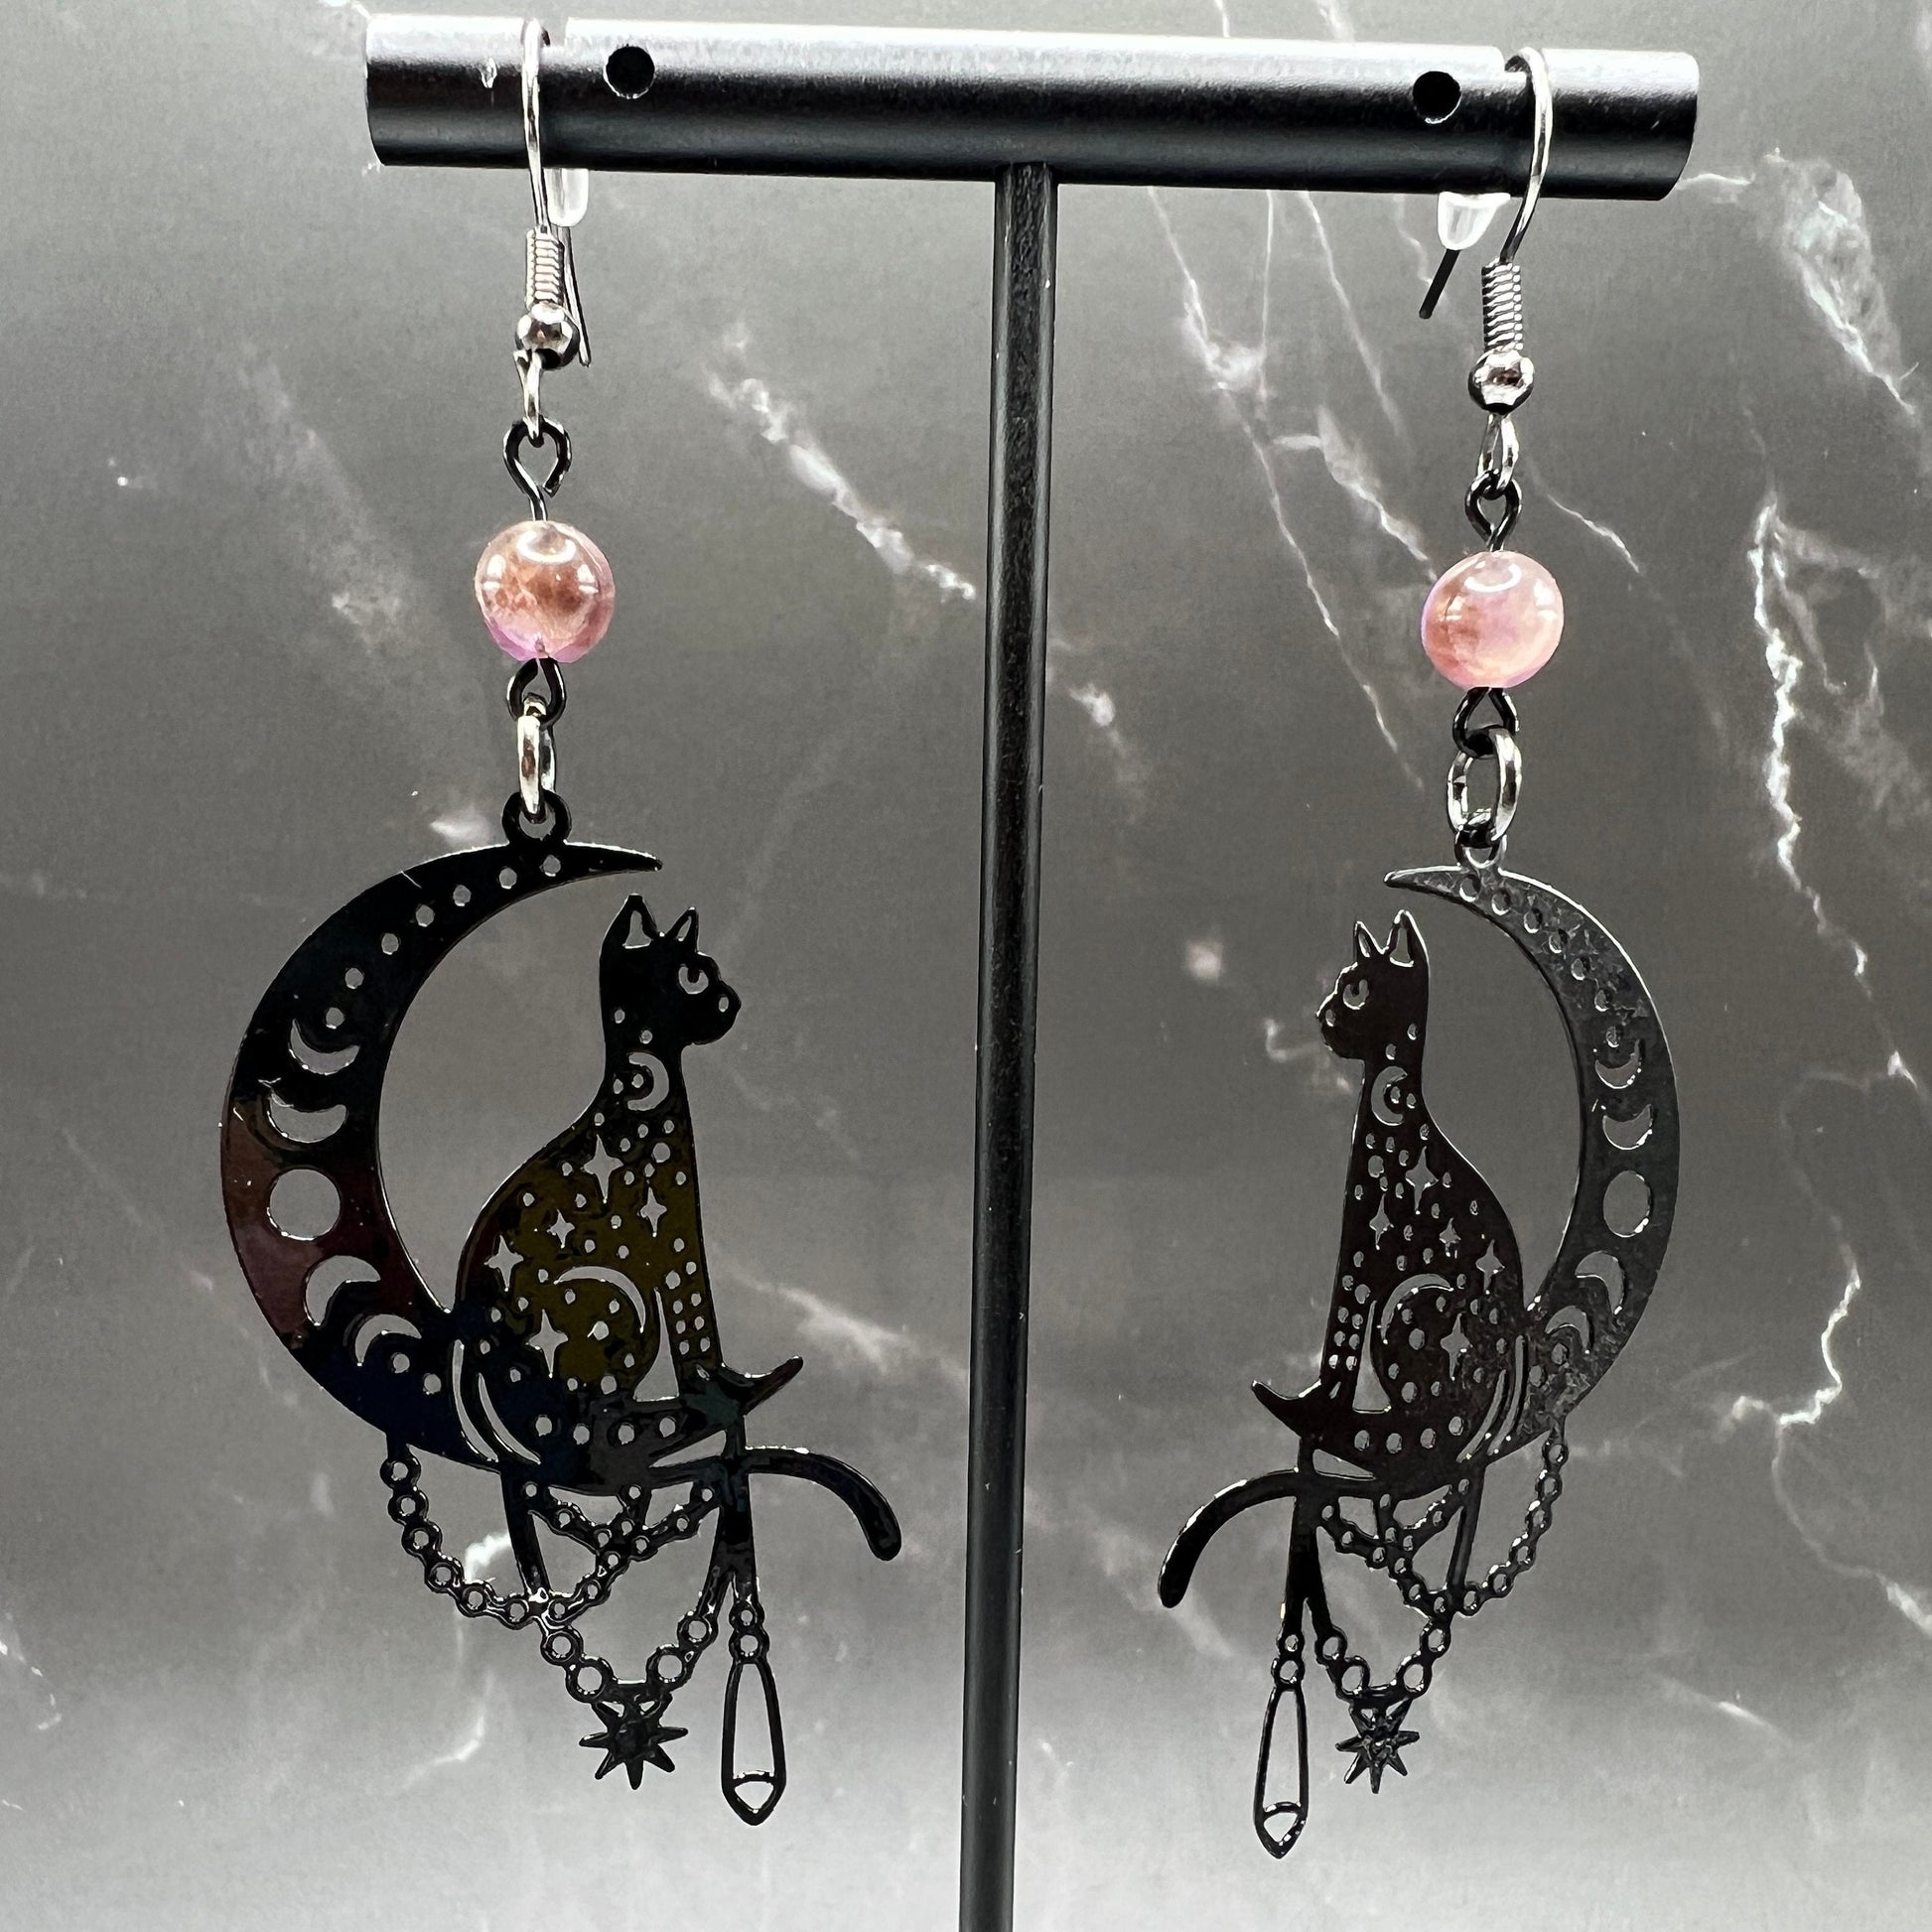 Close-up of Bohemian Beaded Cat Earrings featuring black cat charms and purple crystal beads.